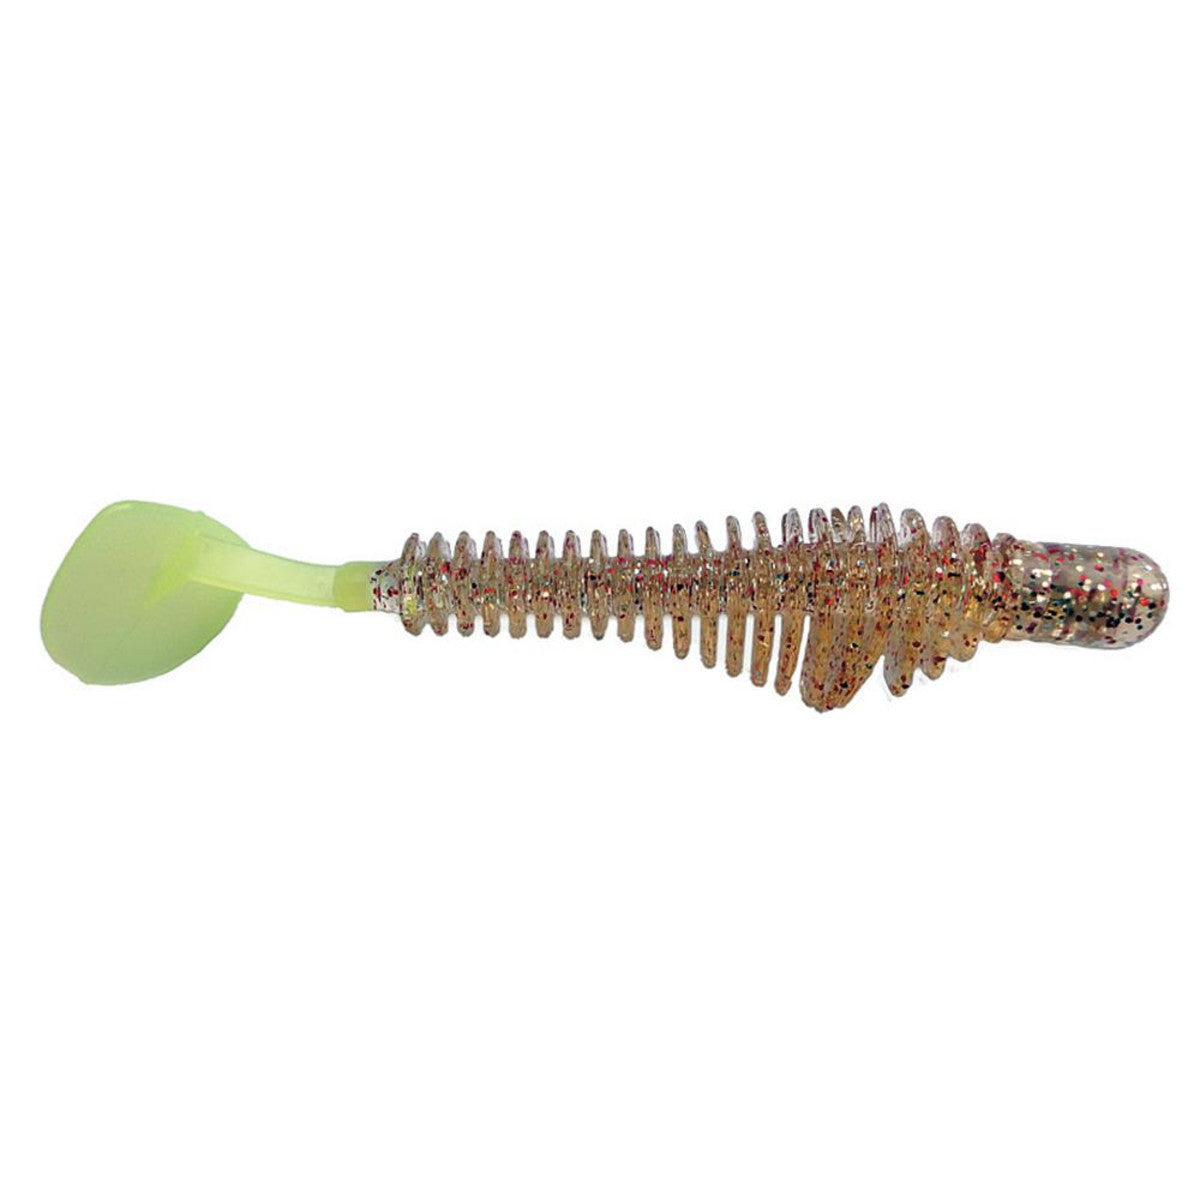 3.25" Gold Cracker/Chartreuse Tail Pulse Paddle Tail